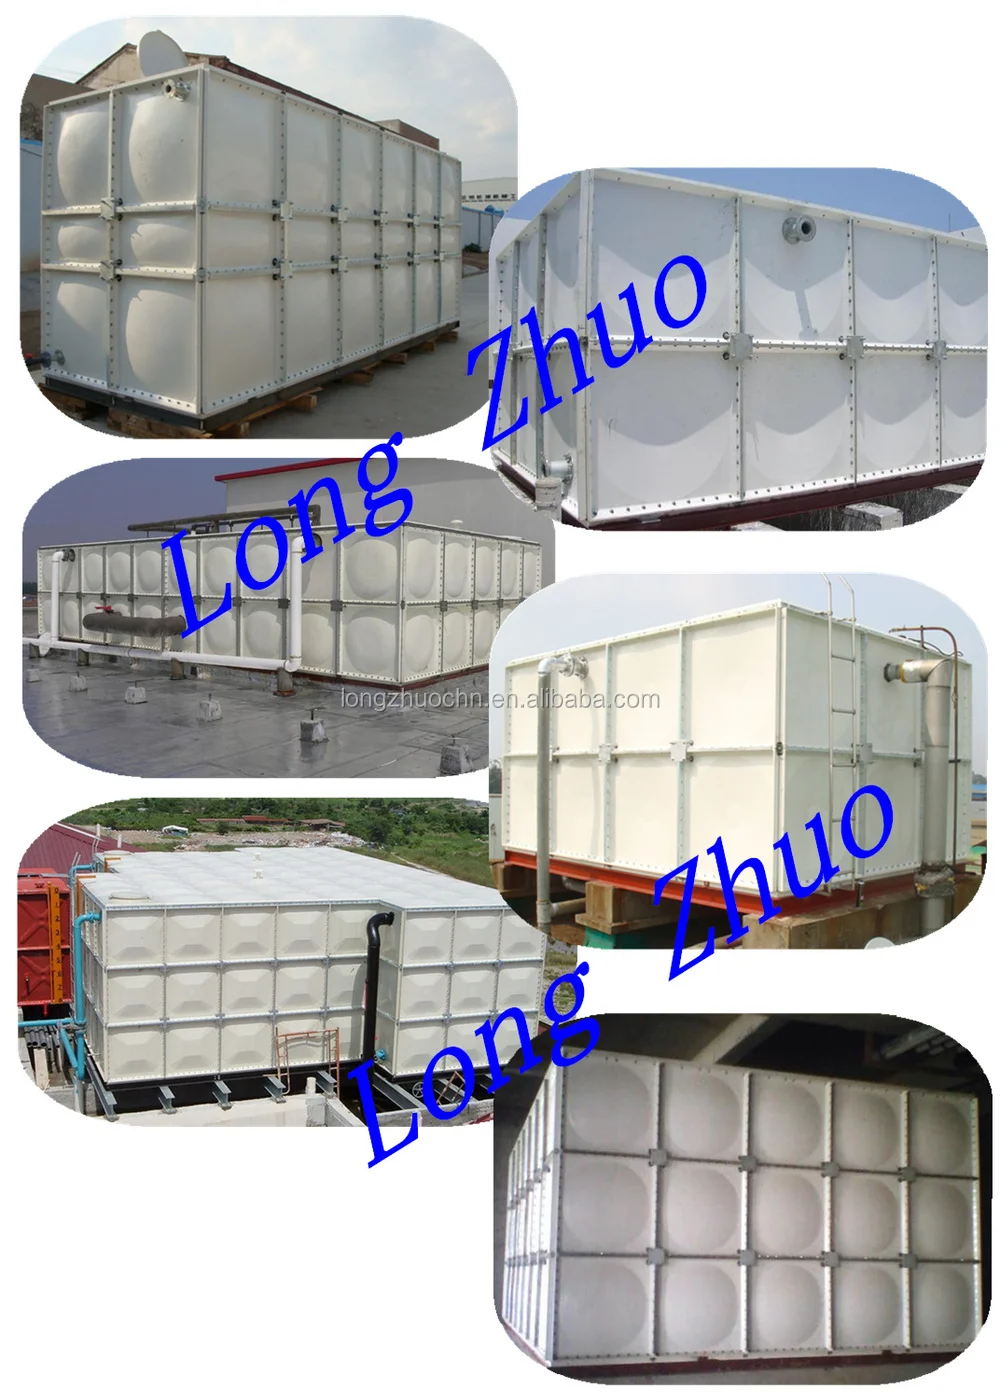 What are some types of 1000-liter water tanks?